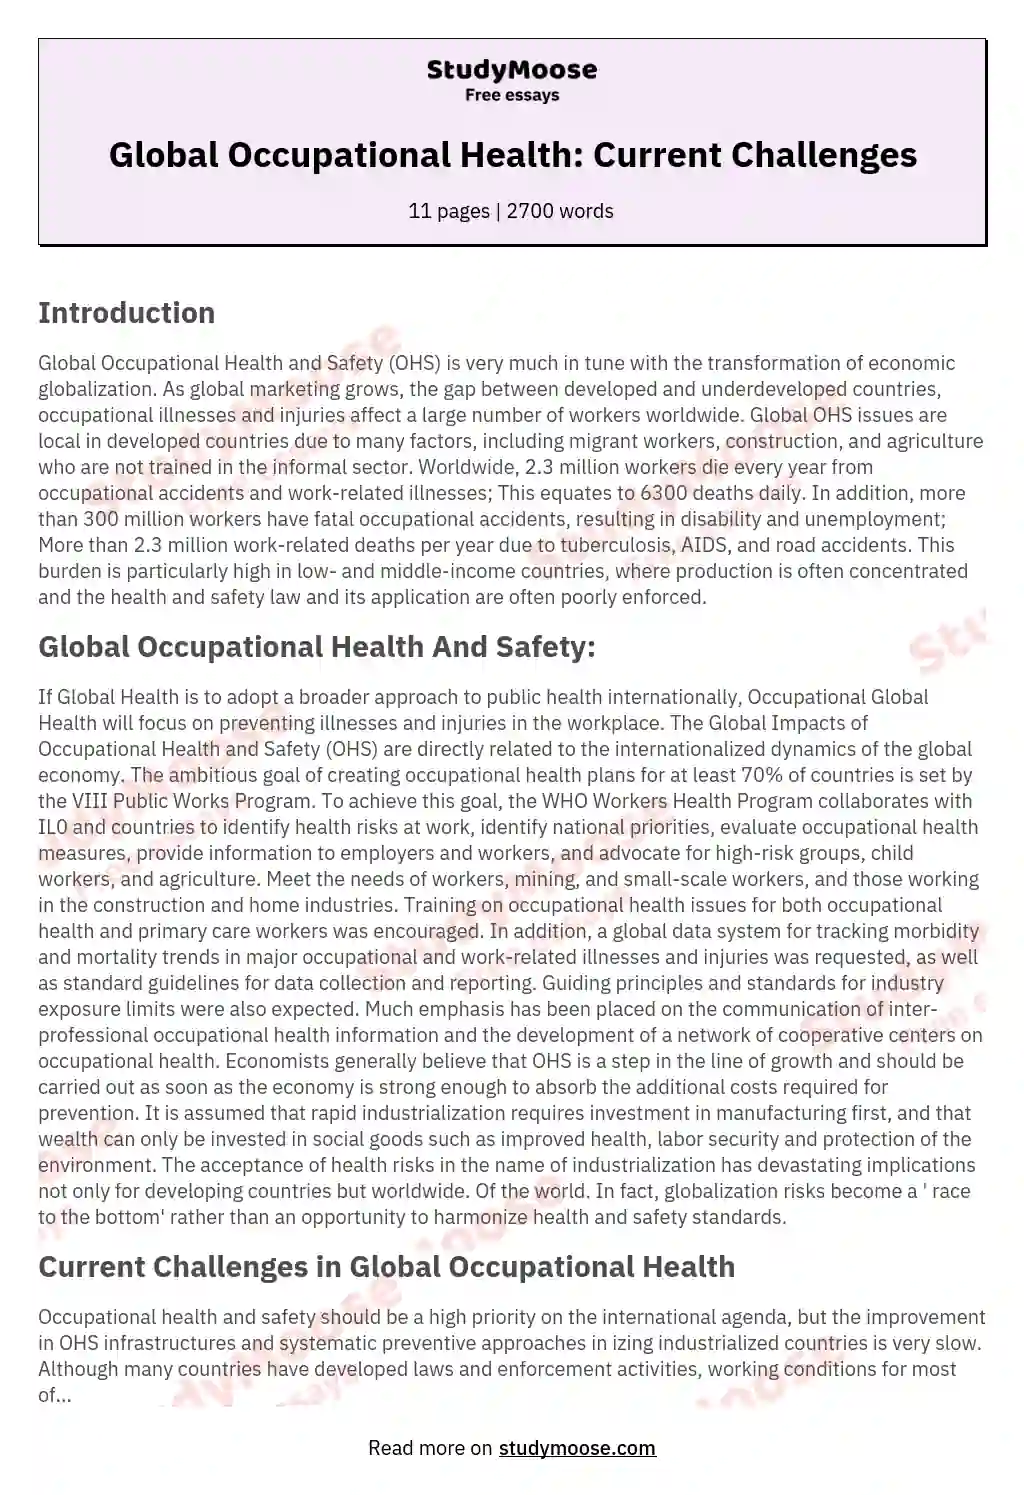 Global Occupational Health: Current Challenges essay